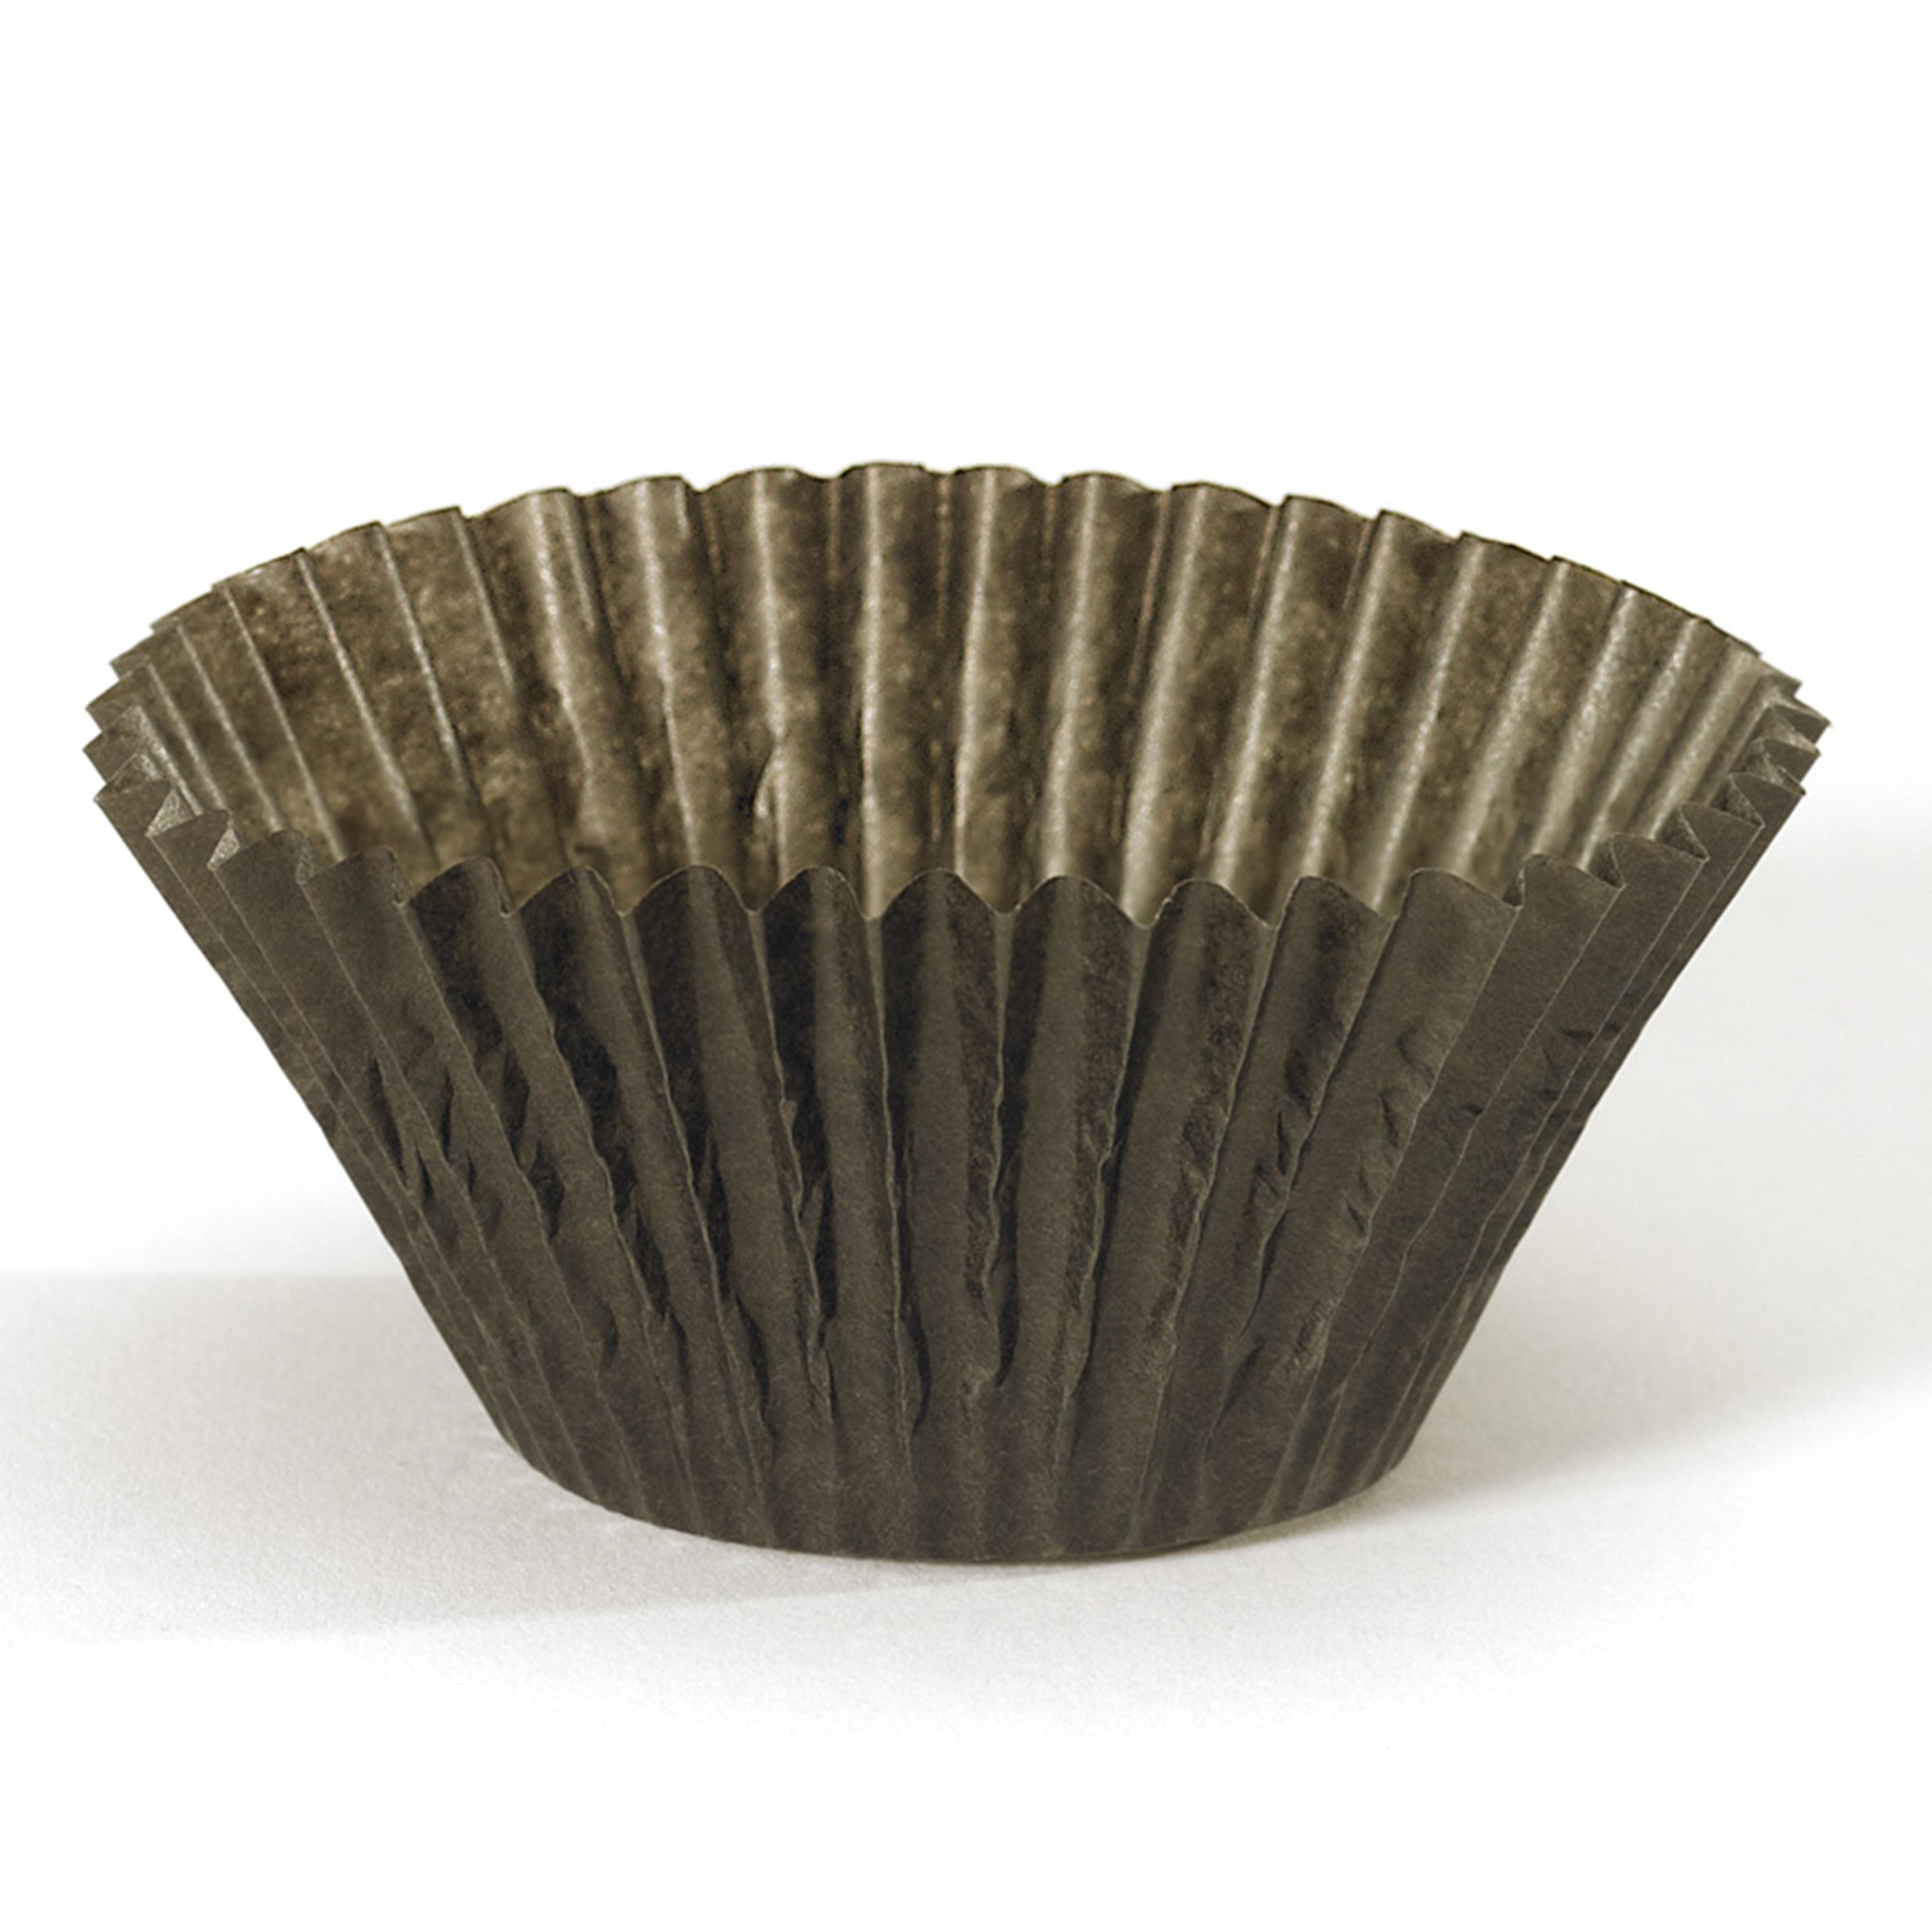 100 Jumbo Cupcake Muffin Liners 2 14 x 1 78 Large Tall White Fluted Baking Cups Cupcake Liners